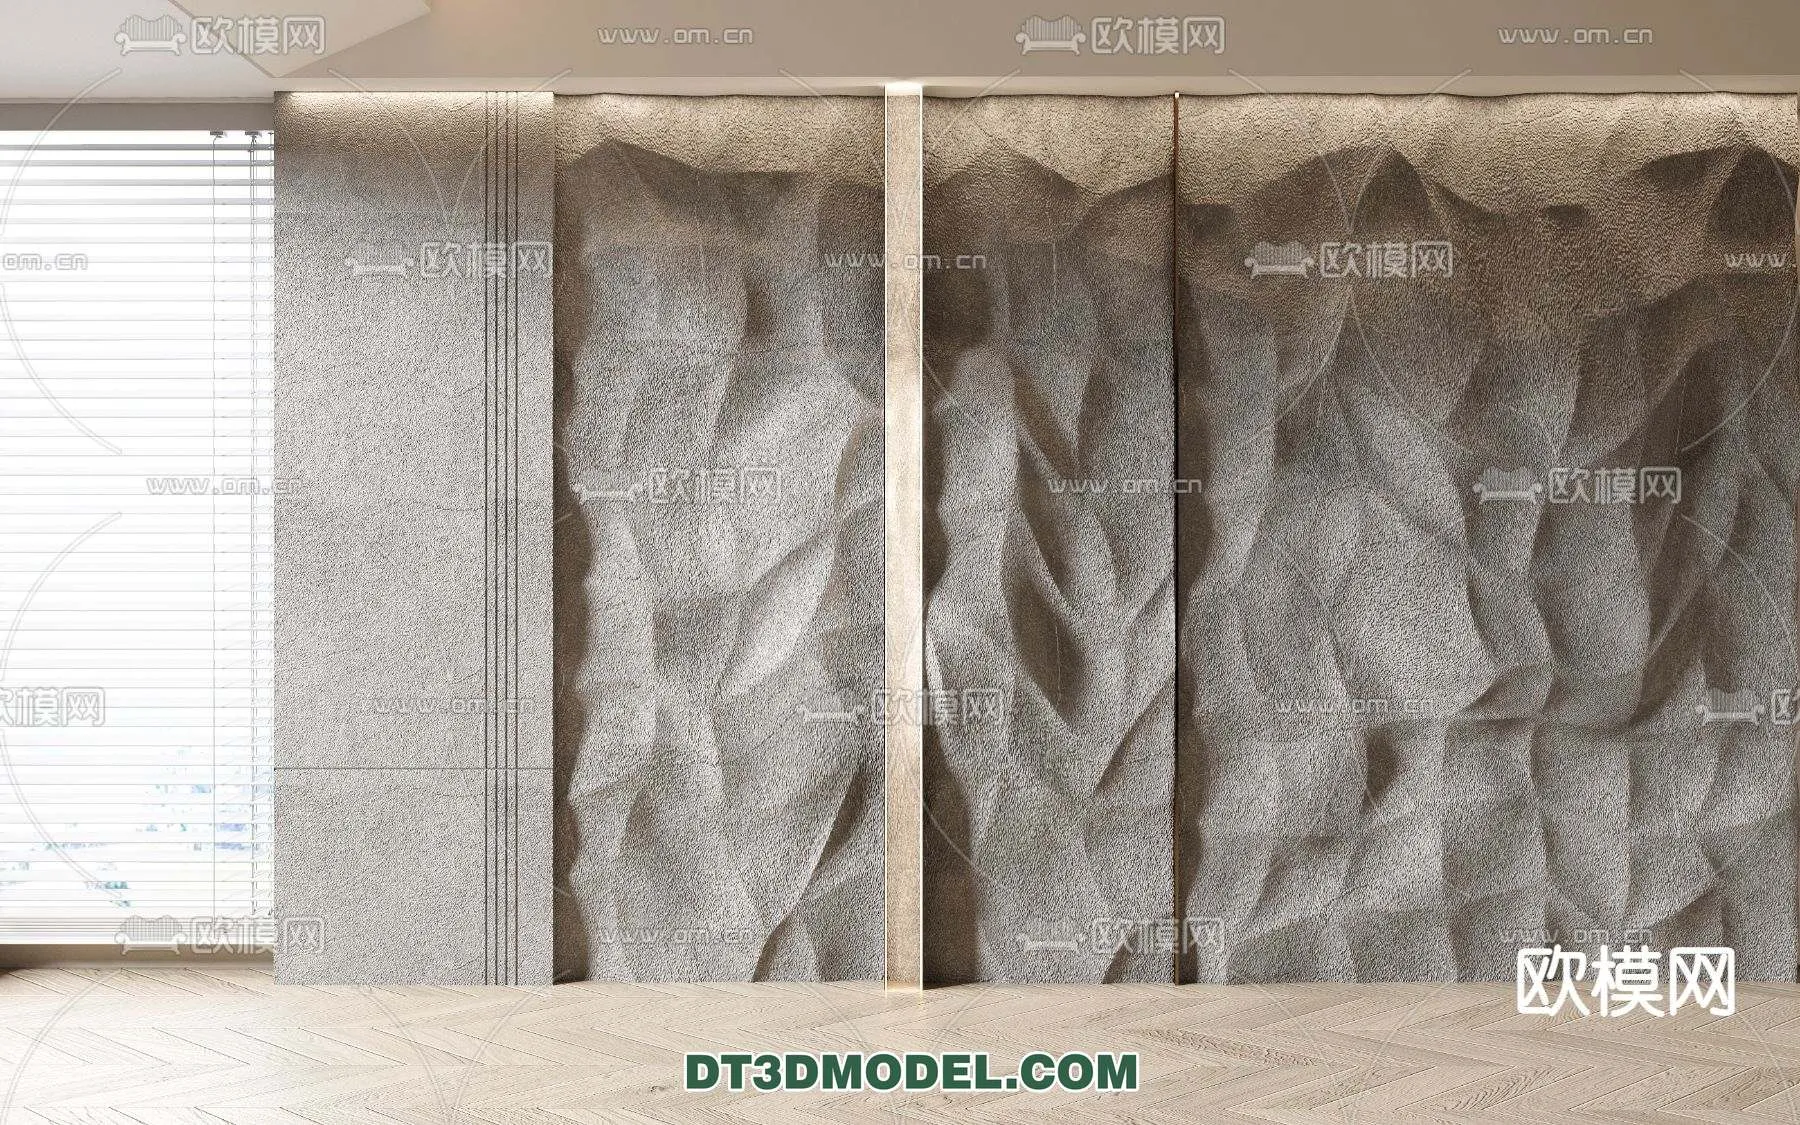 MATERIAL – TEXTURES – ROCK WALL – 0029